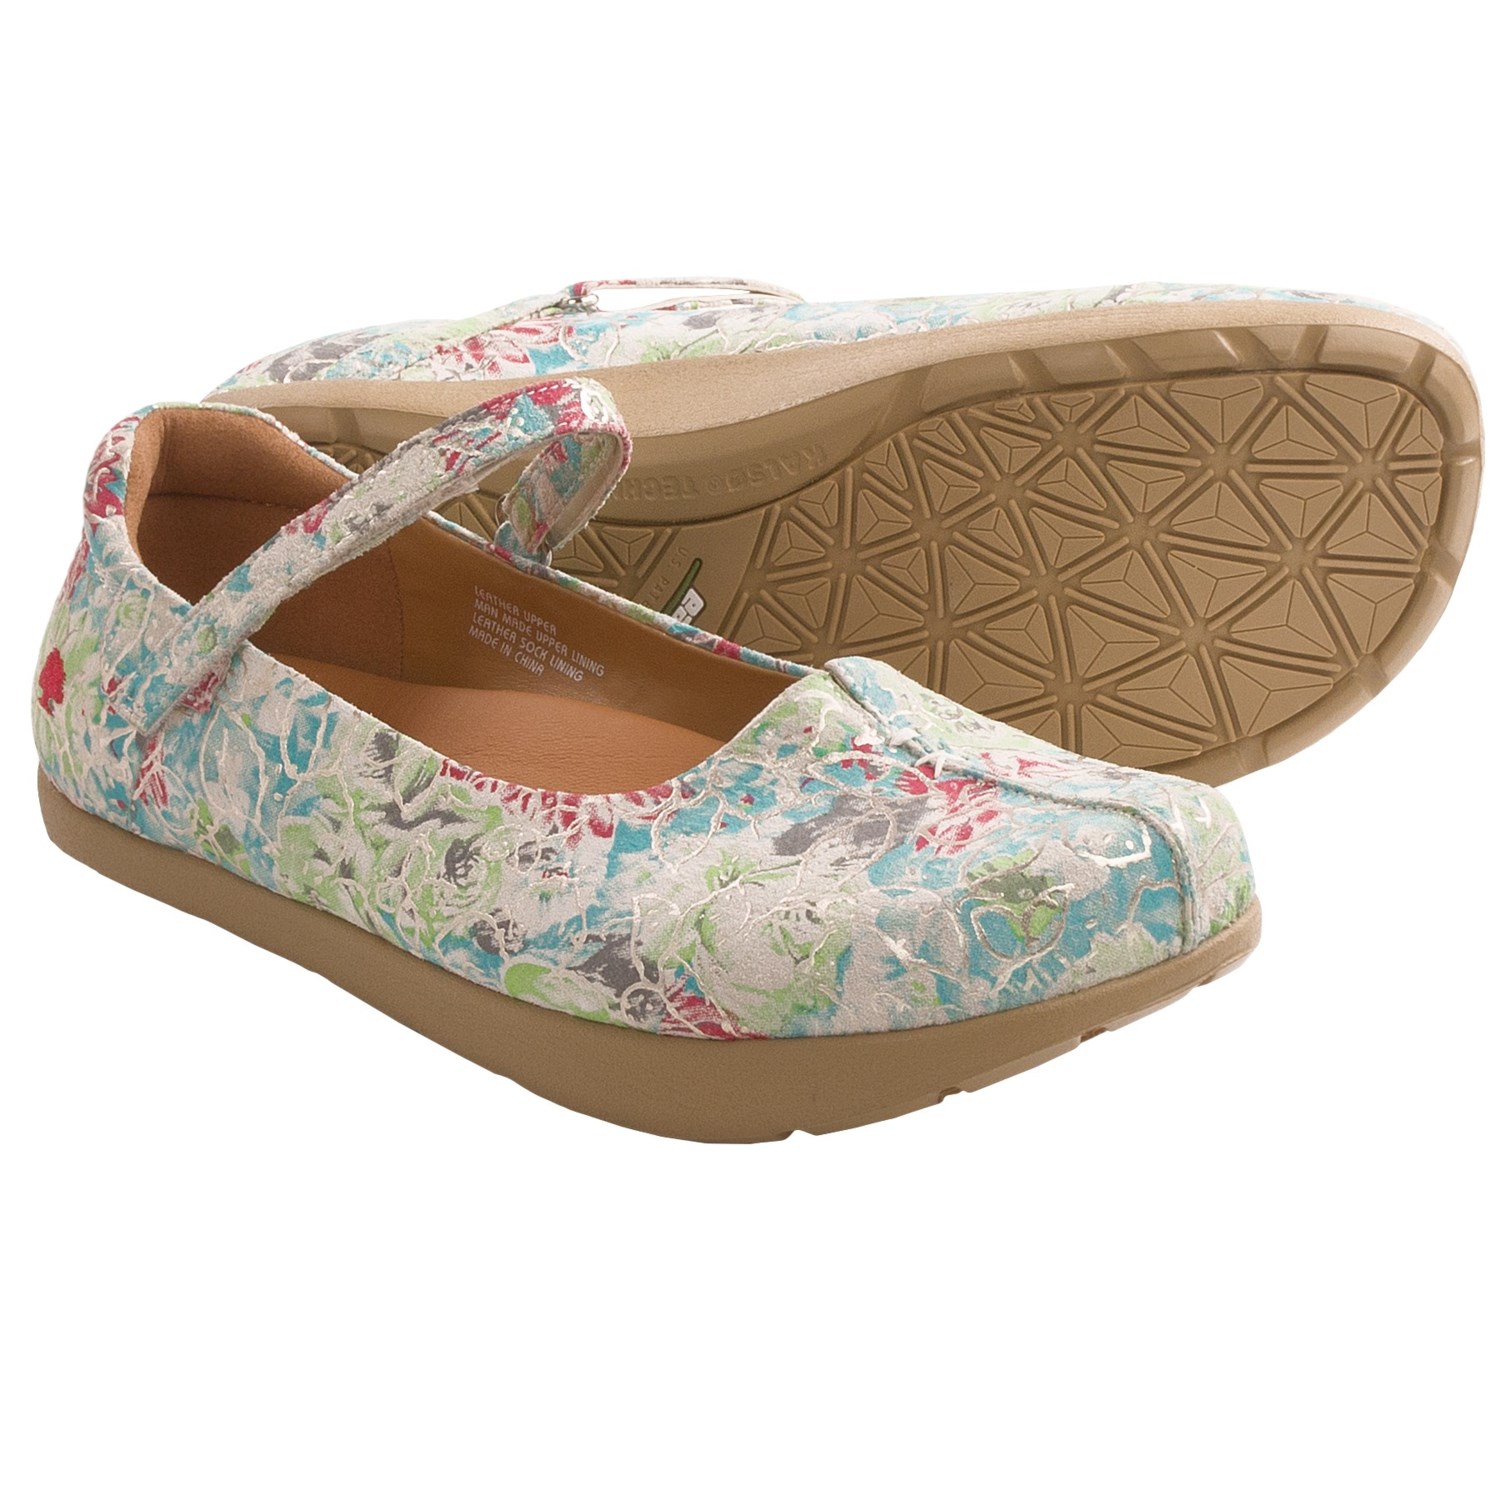 Earth Solar Mary Jane Shoes (For Women) 4255J - Save 82%